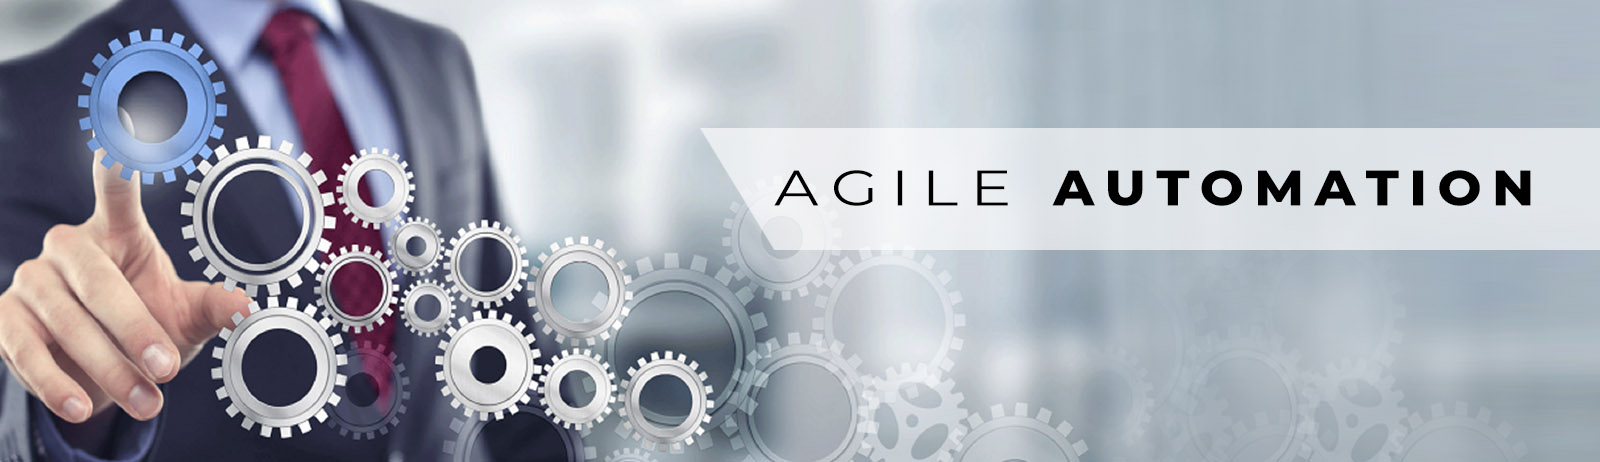 Agile Automation | Consulting, Design & Engineering Services